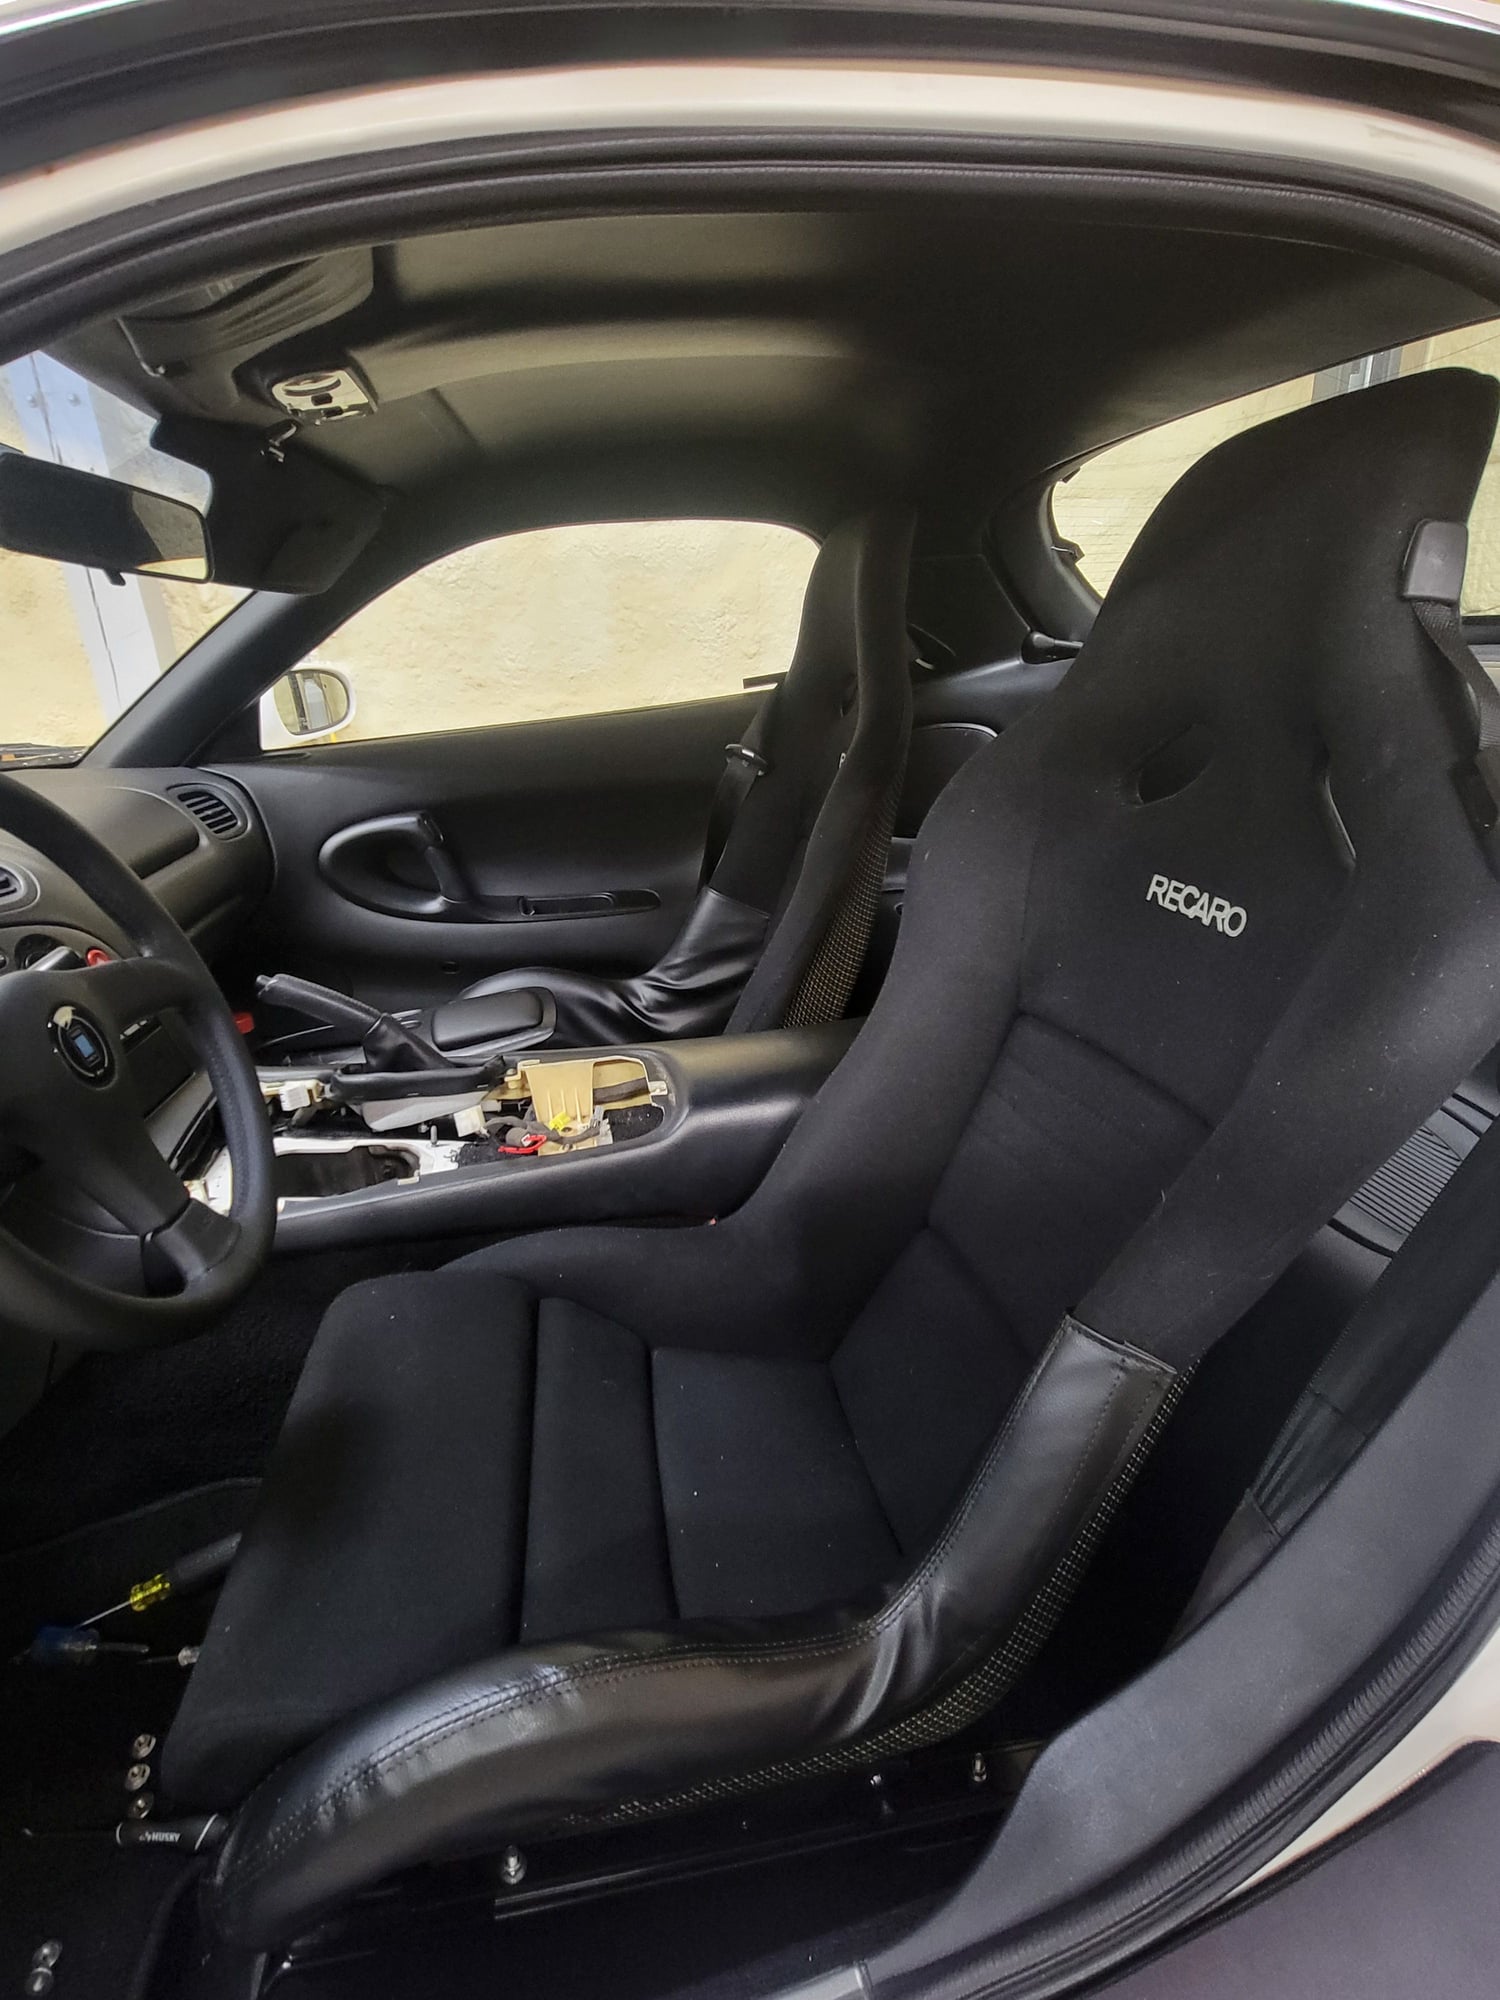 Interior/Upholstery - Angry Panda RZs, TILTWORX rails - New - 1986 to 2002 Mazda RX-7 - West Harrison, IN 47060, United States